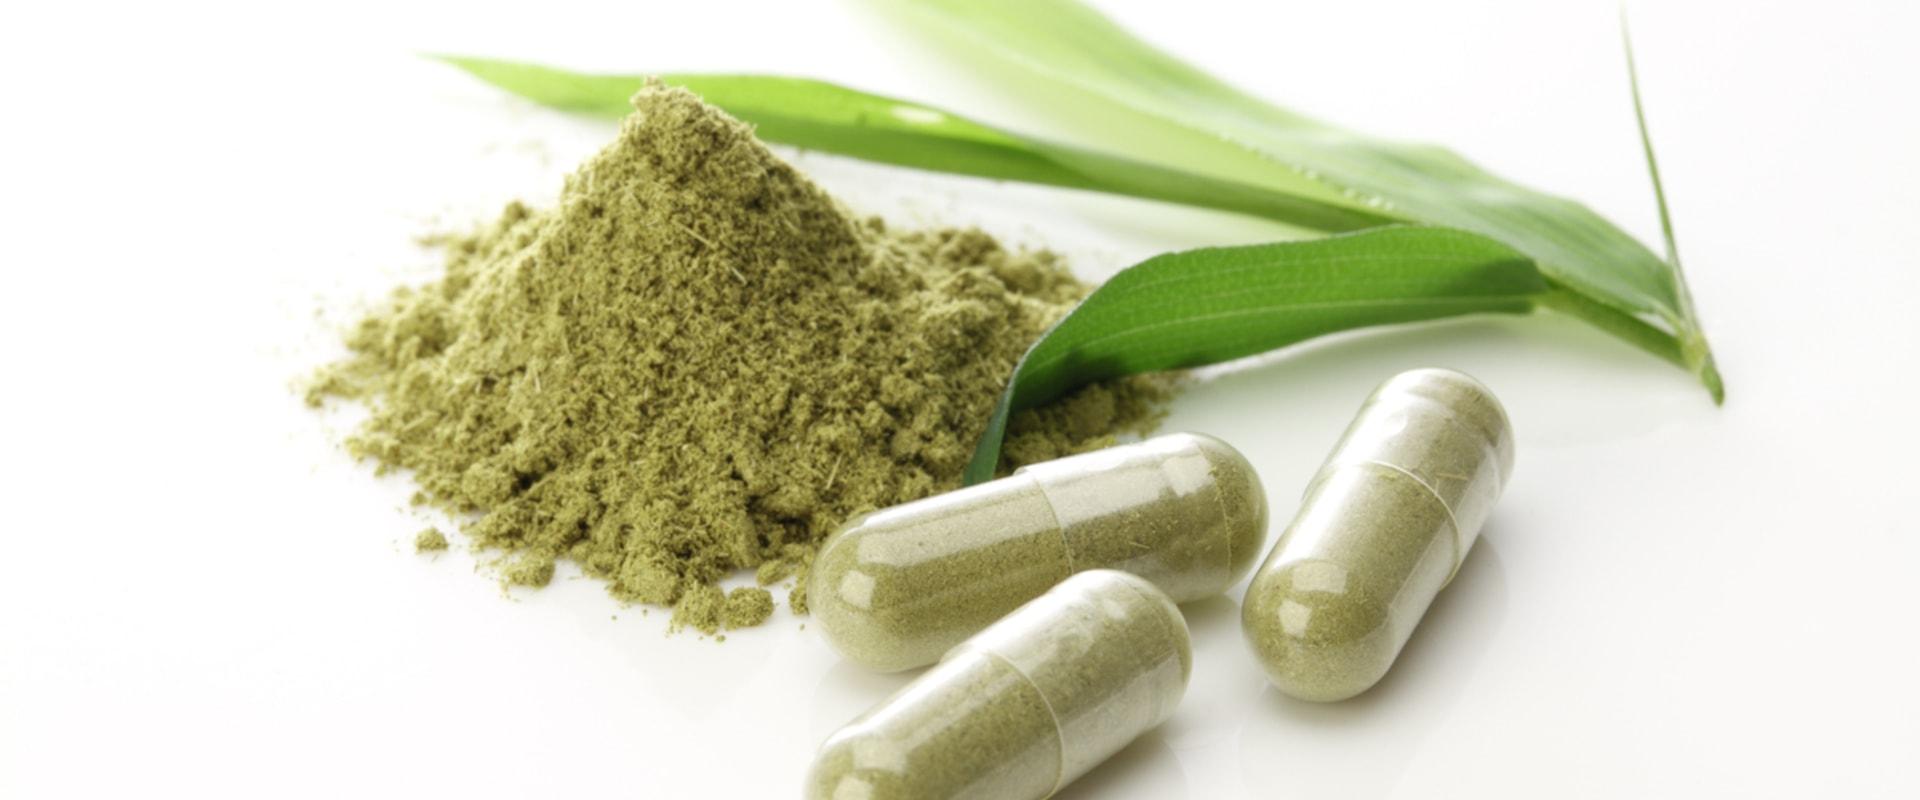 Understanding the Dietary Supplements Health and Education Act of 1994